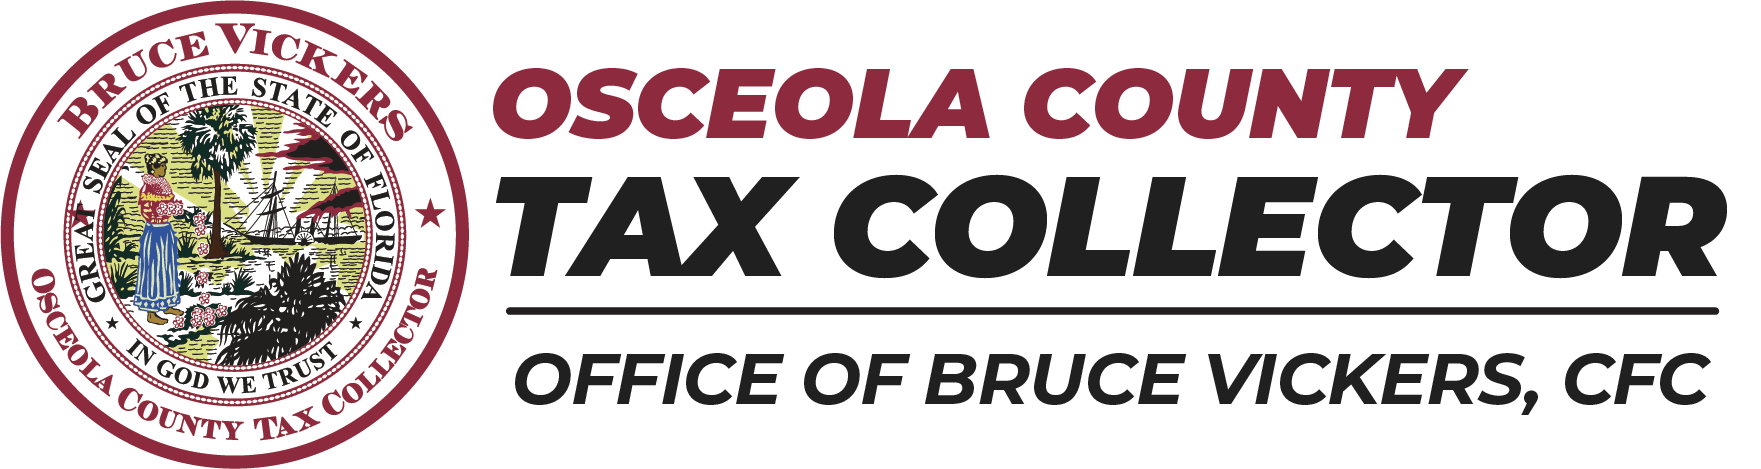 Osceola County Tax Collector - Office of Bruce Vickers